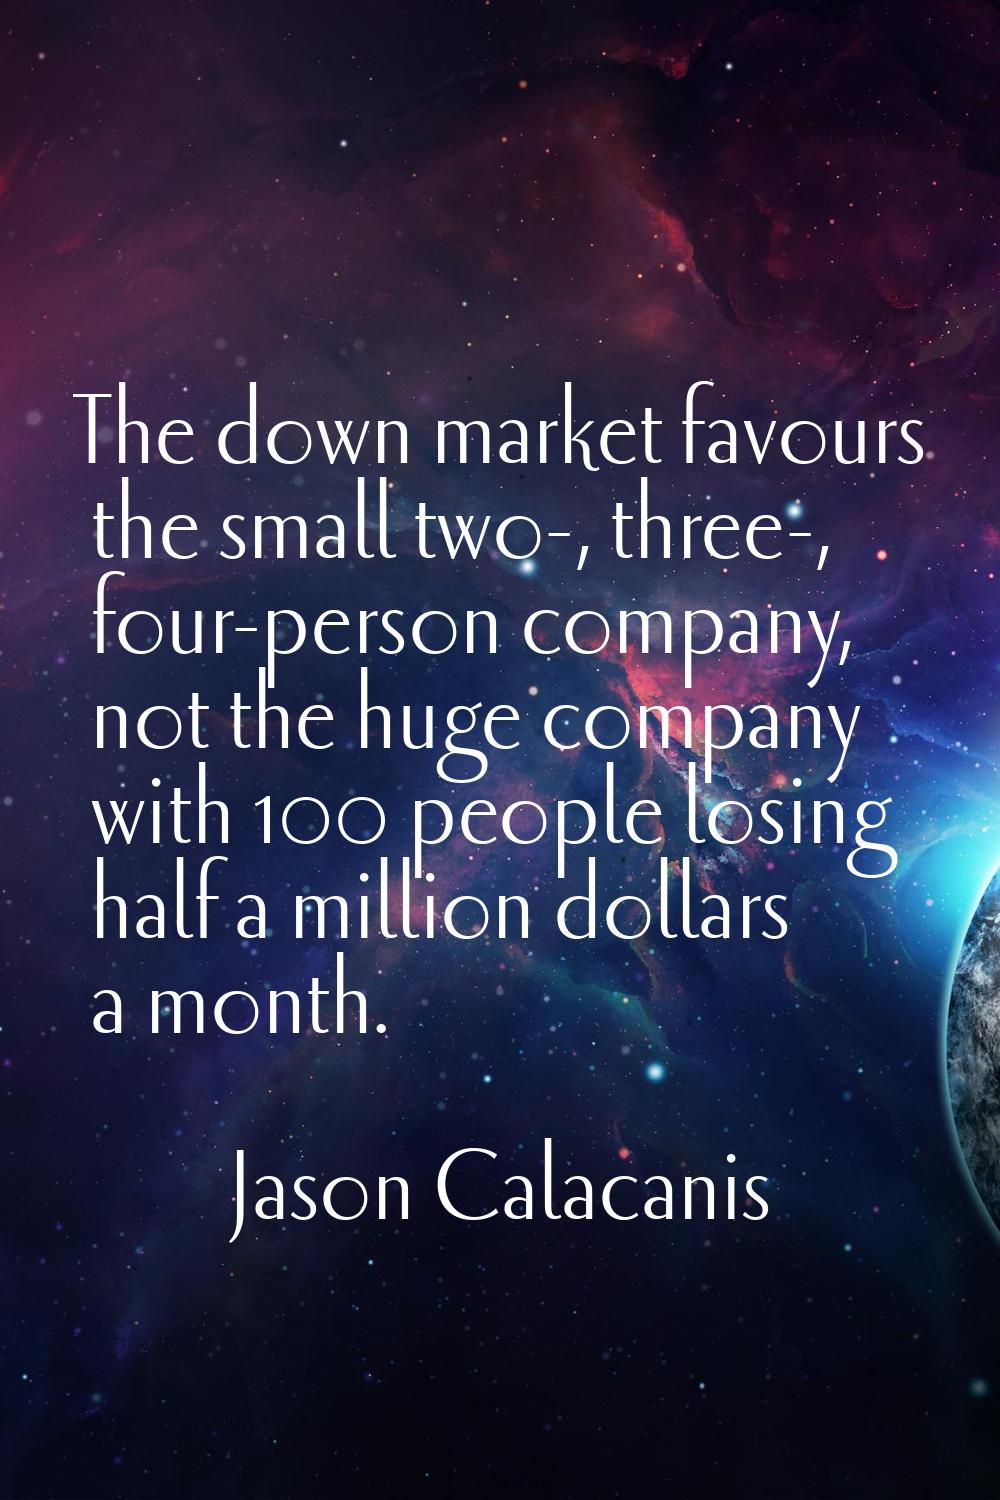 The down market favours the small two-, three-, four-person company, not the huge company with 100 